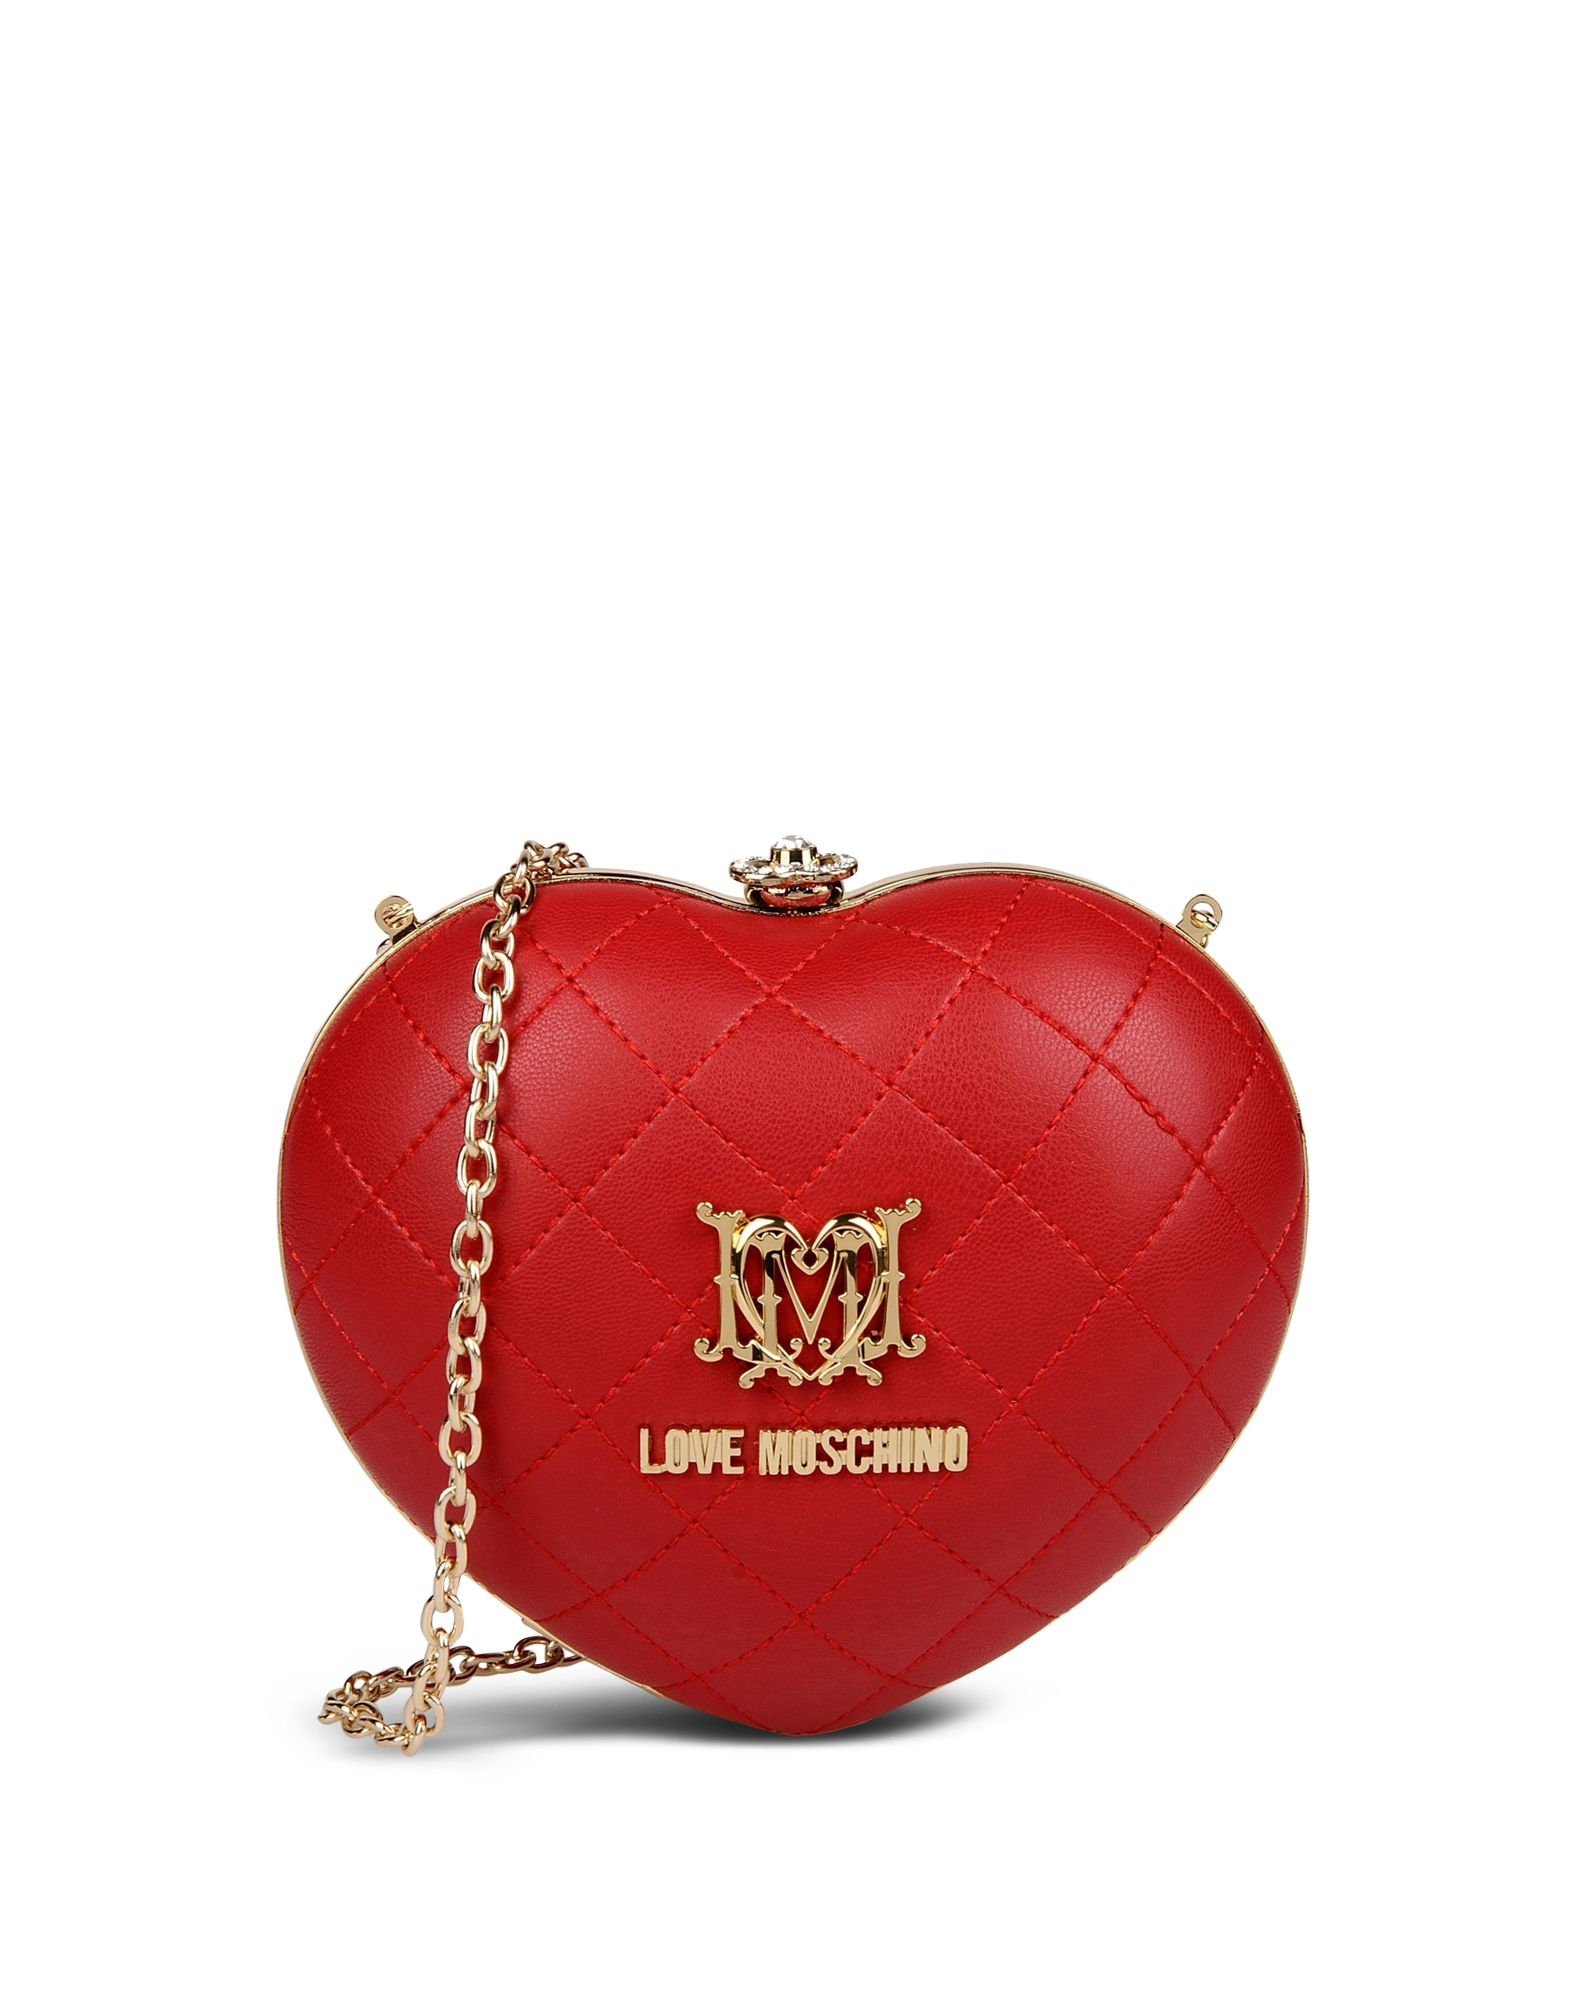 Lyst - Love moschino Clutches in Red